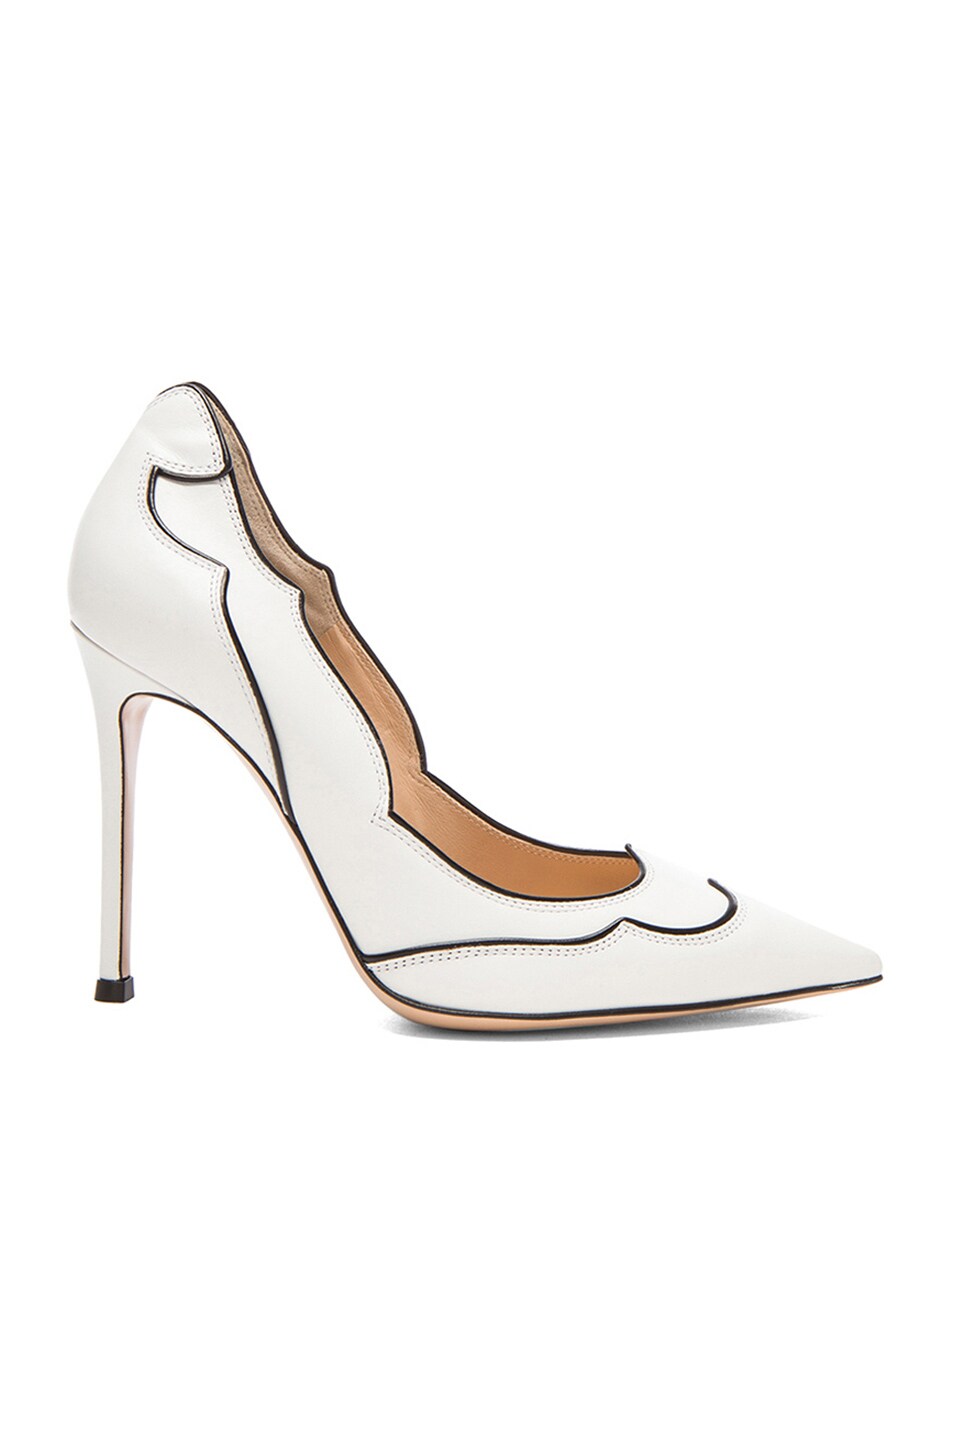 Image 1 of Gianvito Rossi Western Leather Pumps in Off White & Nero